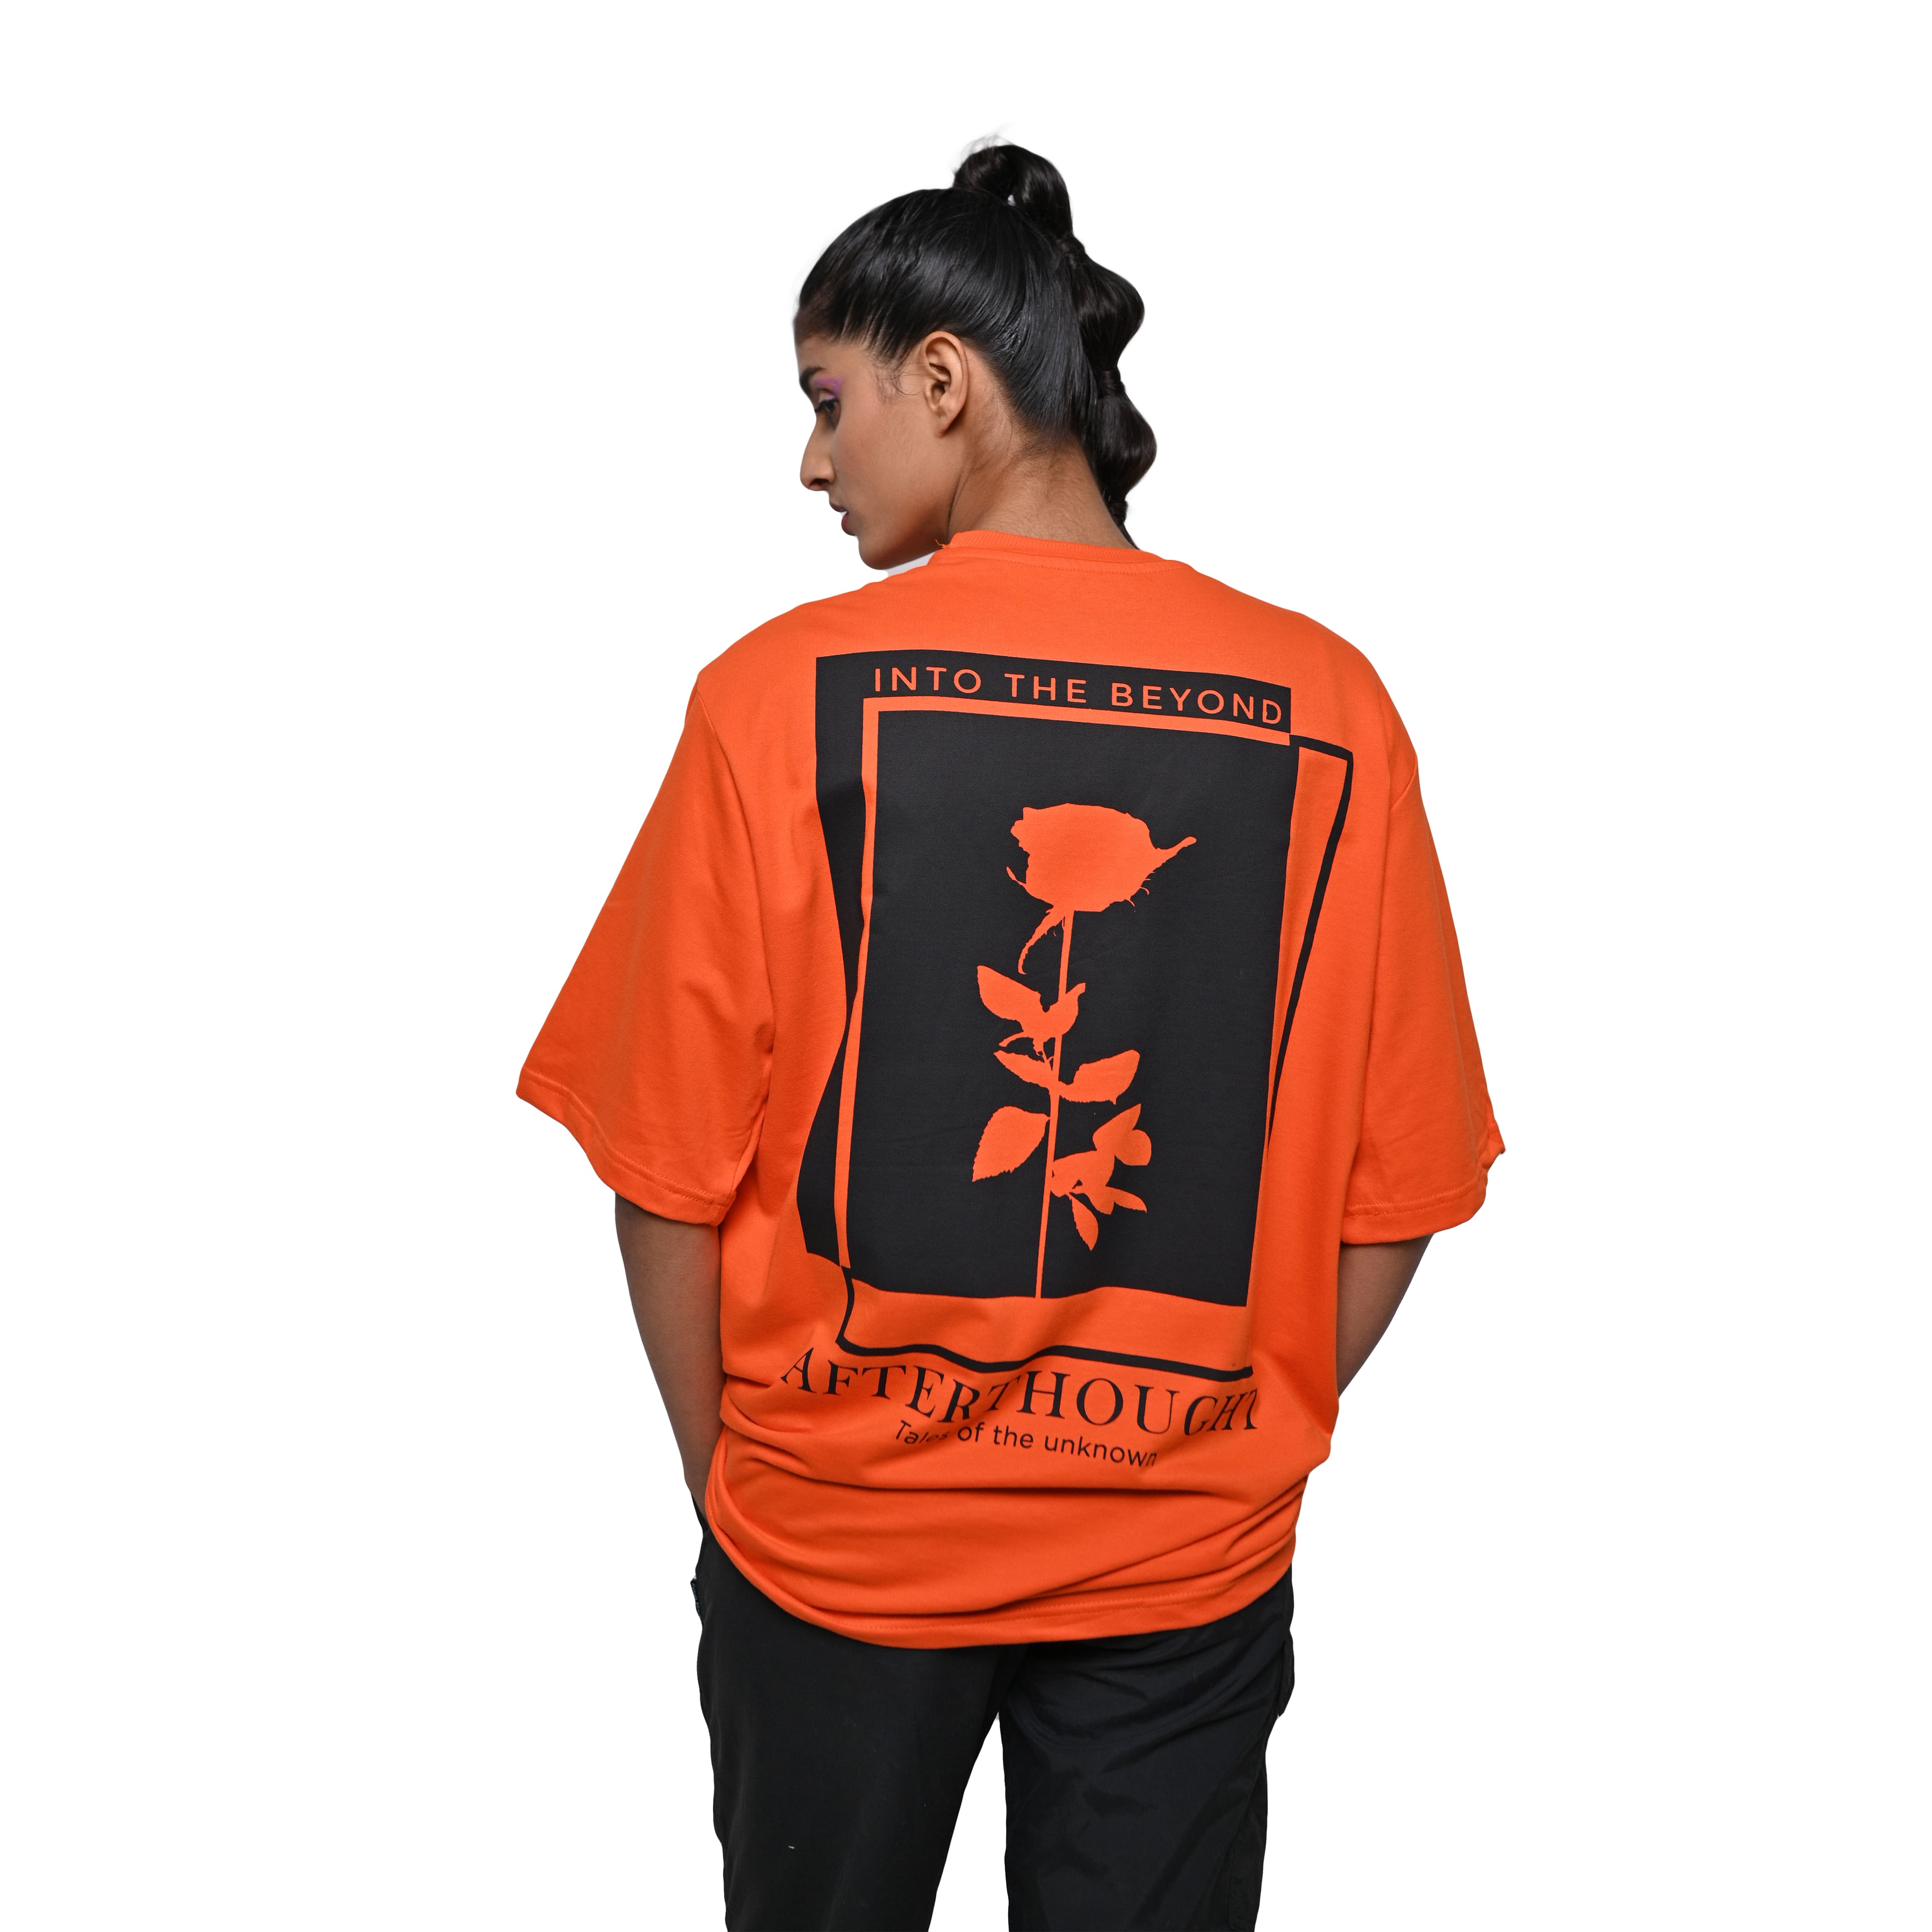 Oversized orange t-shirt with Afterthought style print on the back side with model